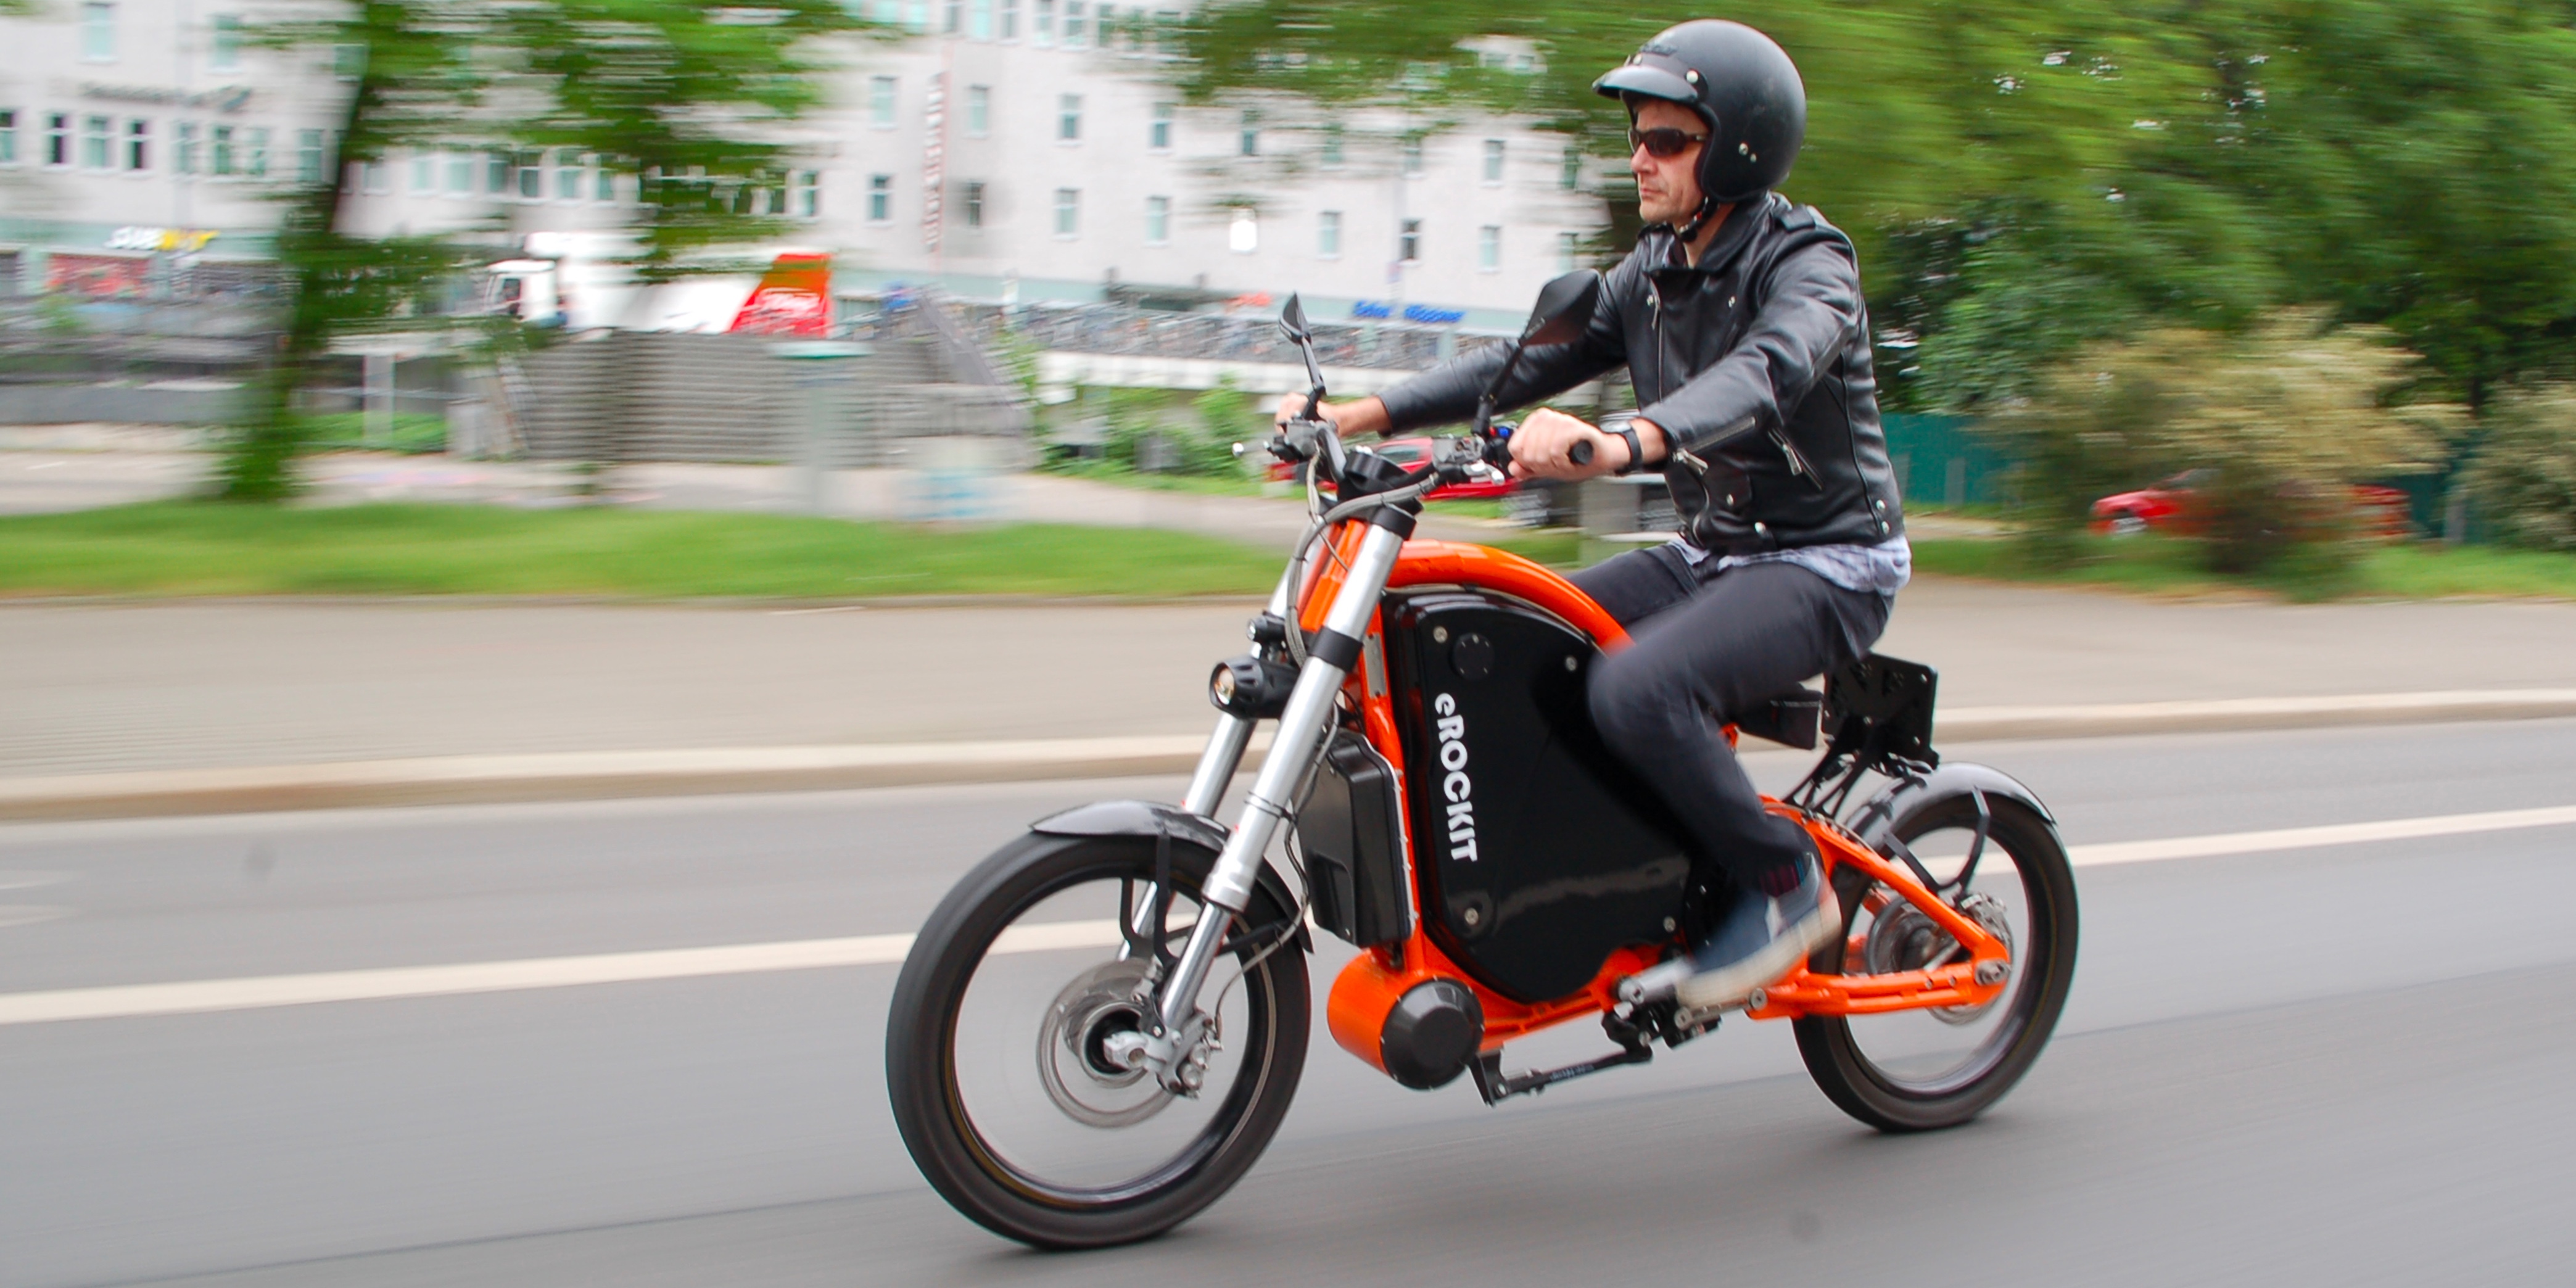 black coin total This 50 mph (80 km/h) eRockit electric motorcycle has pedals... but why?